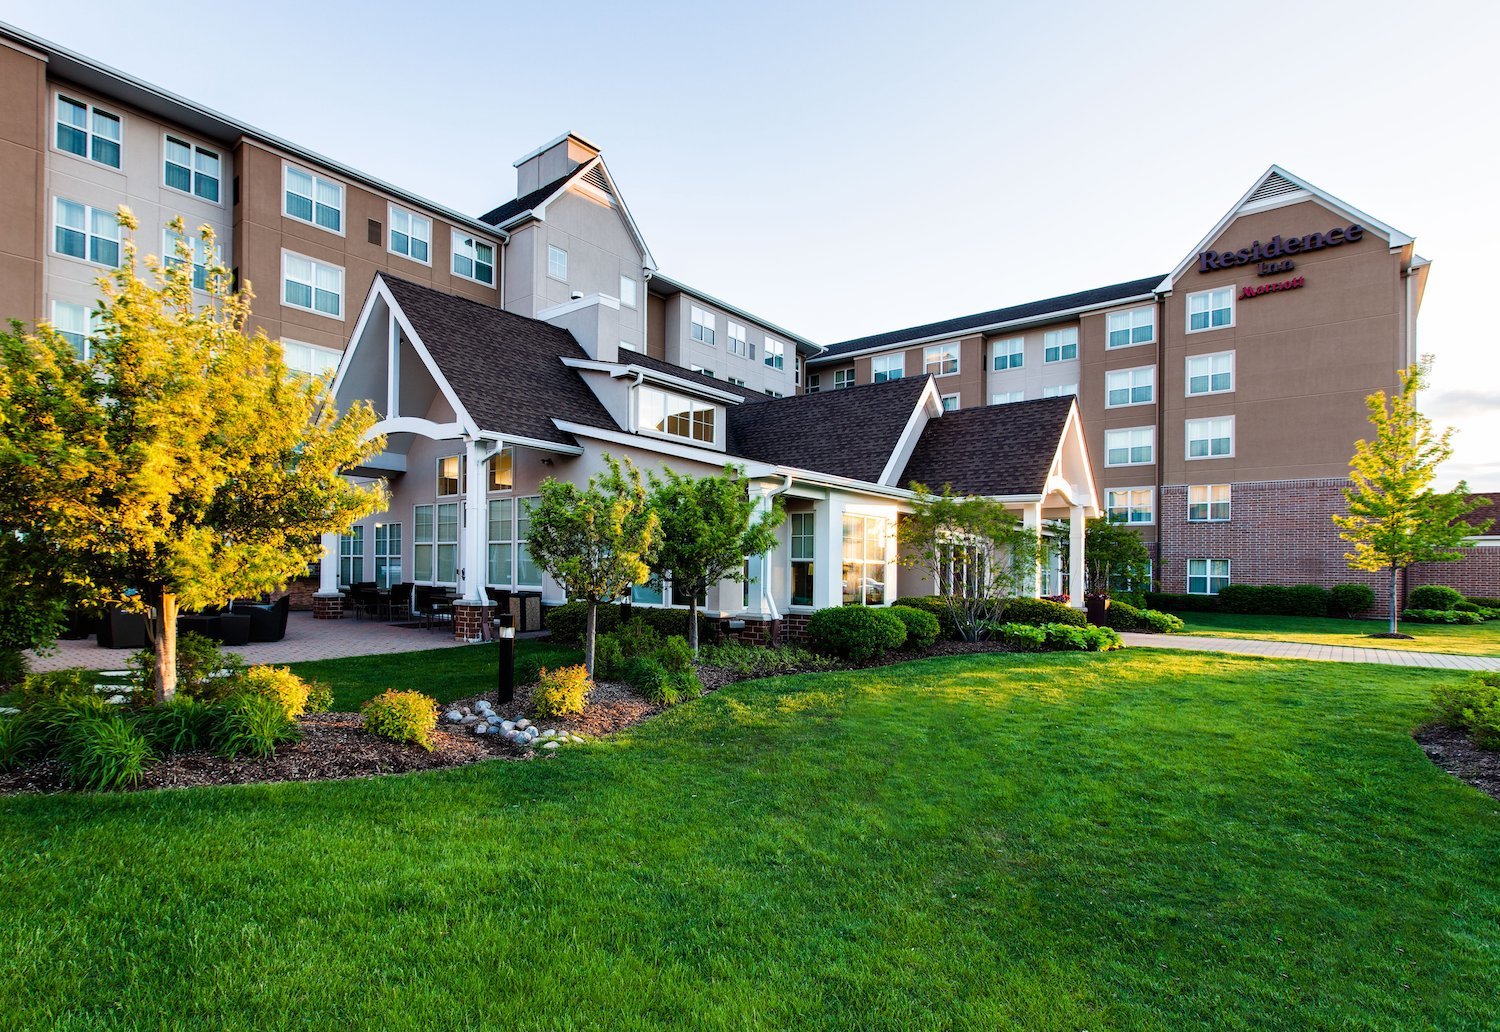 Photo of Residence Inn by Marriott Chicago Midway Airport, Bedford Park, IL